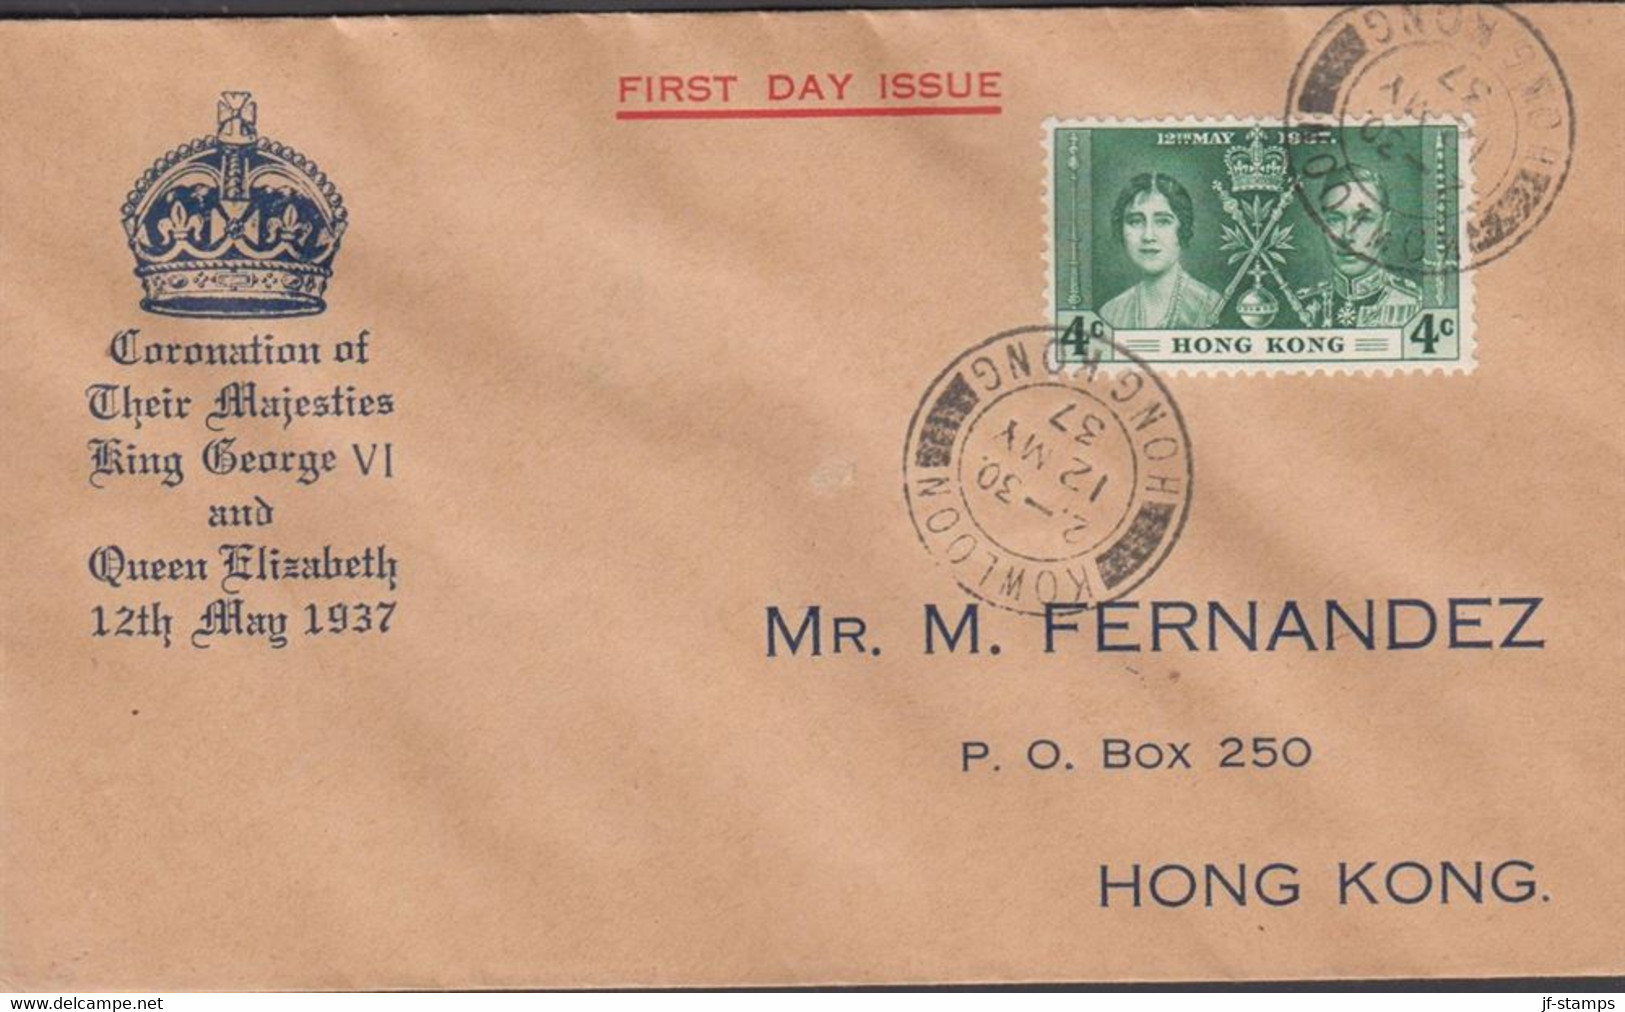 1937. HONG KONG Georg VI. 4 C Coronation On Nice FDC Cancelled FIRST DAY OF ISSUE KOWLOON HON... (Michel 136) - JF427055 - Covers & Documents